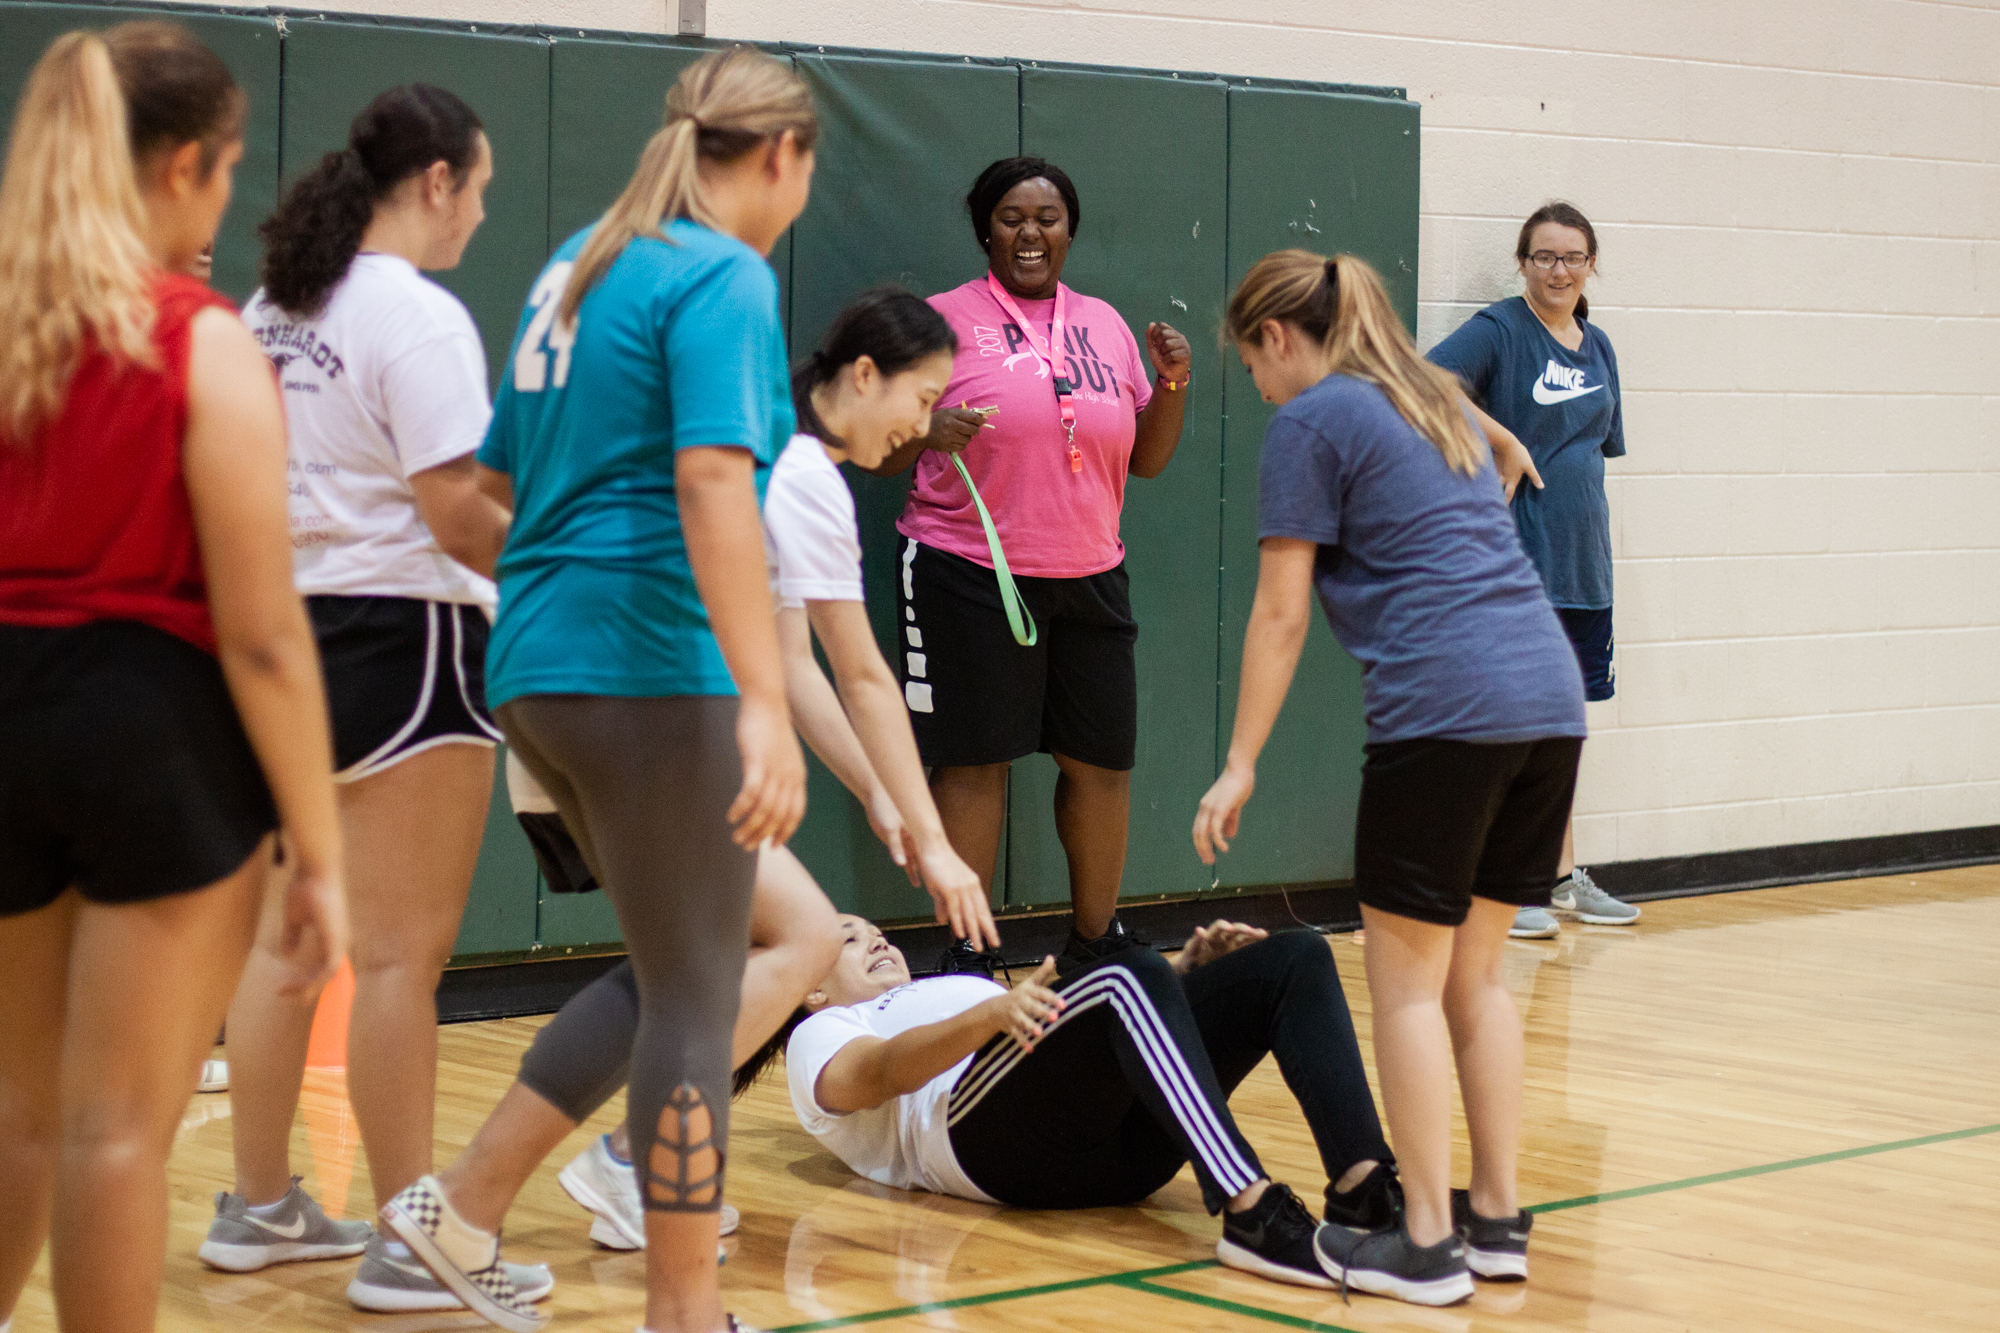  Chiniqua Bright laughs as her students help each other perform sit-ups on Oct. 3, 2018. Bright and her students were warming up for the 2018 basketball season to begin.  